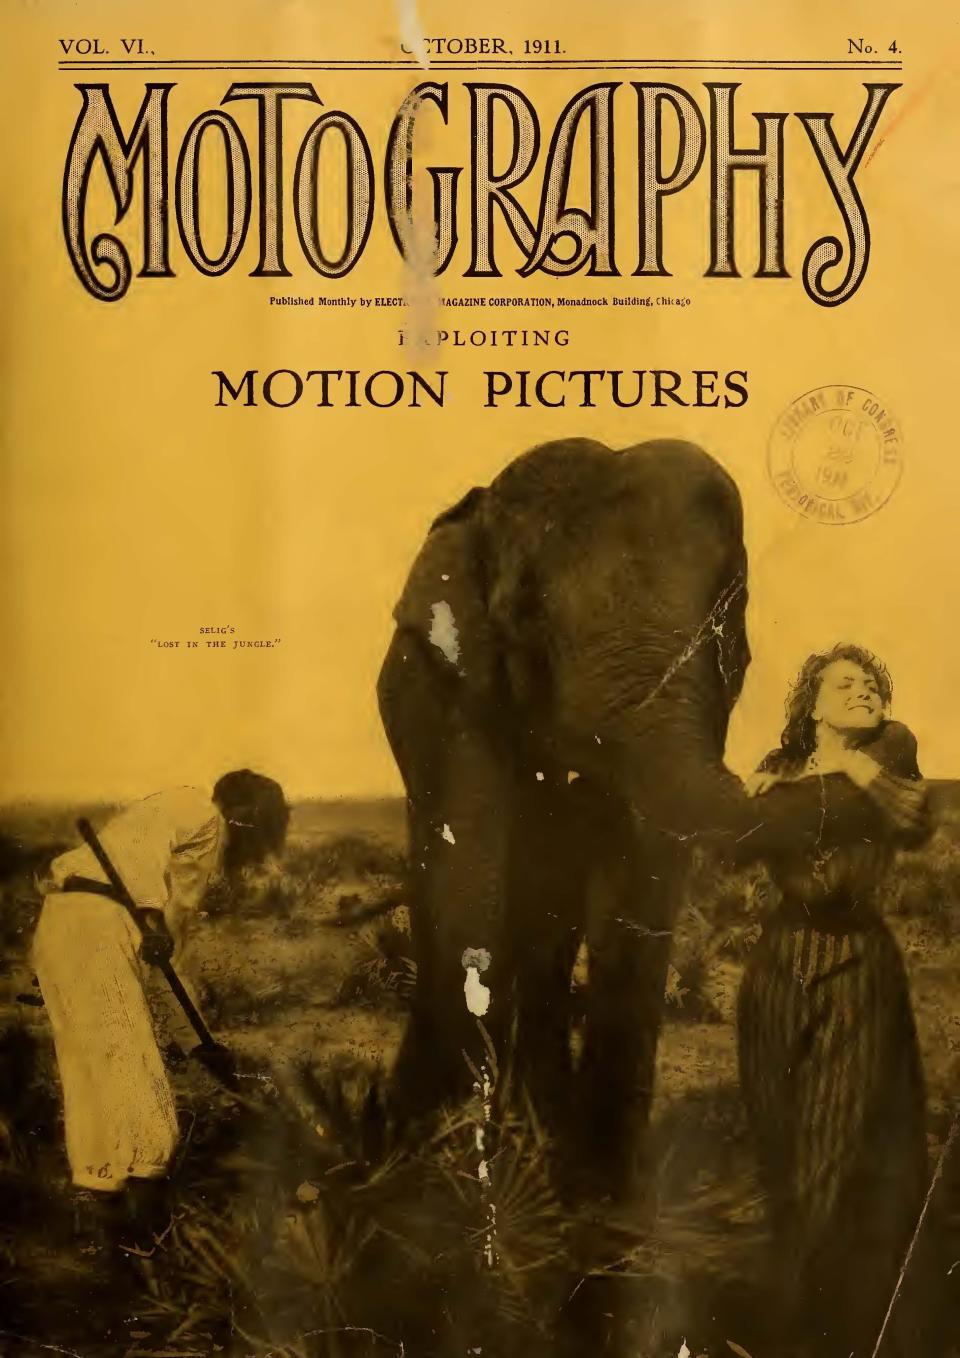 A magazine cover promotes a scene from "Lost in the Jungle," a silent film shot in Jacksonville that survives today.